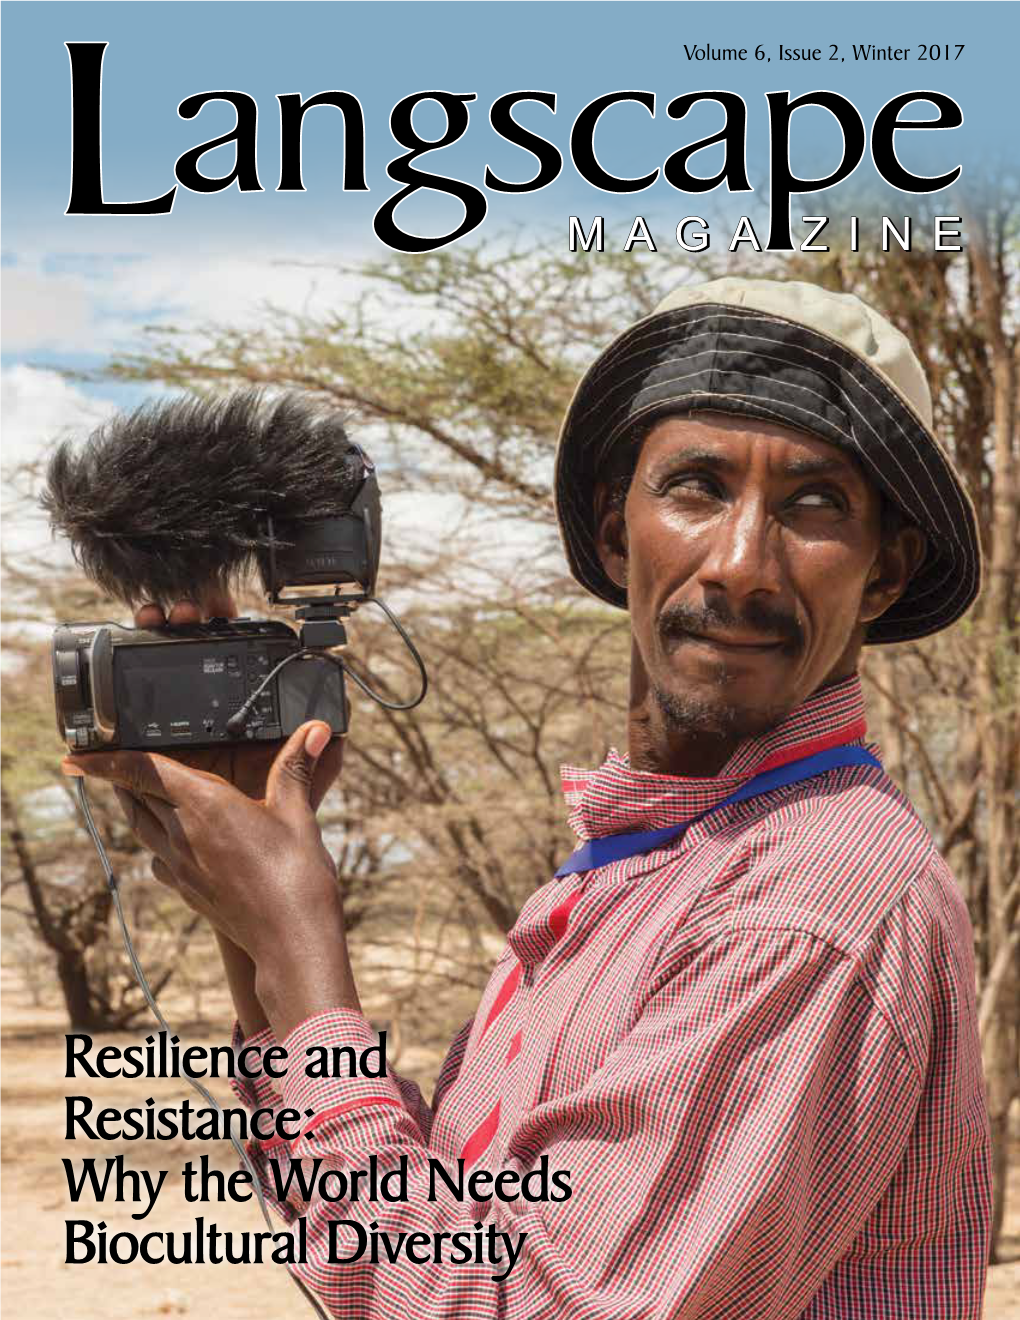 Resilience and Resistance: Why the World Needs Biocultural Diversity Langscape Magazine Is an Extension of the Voice of Terralingua